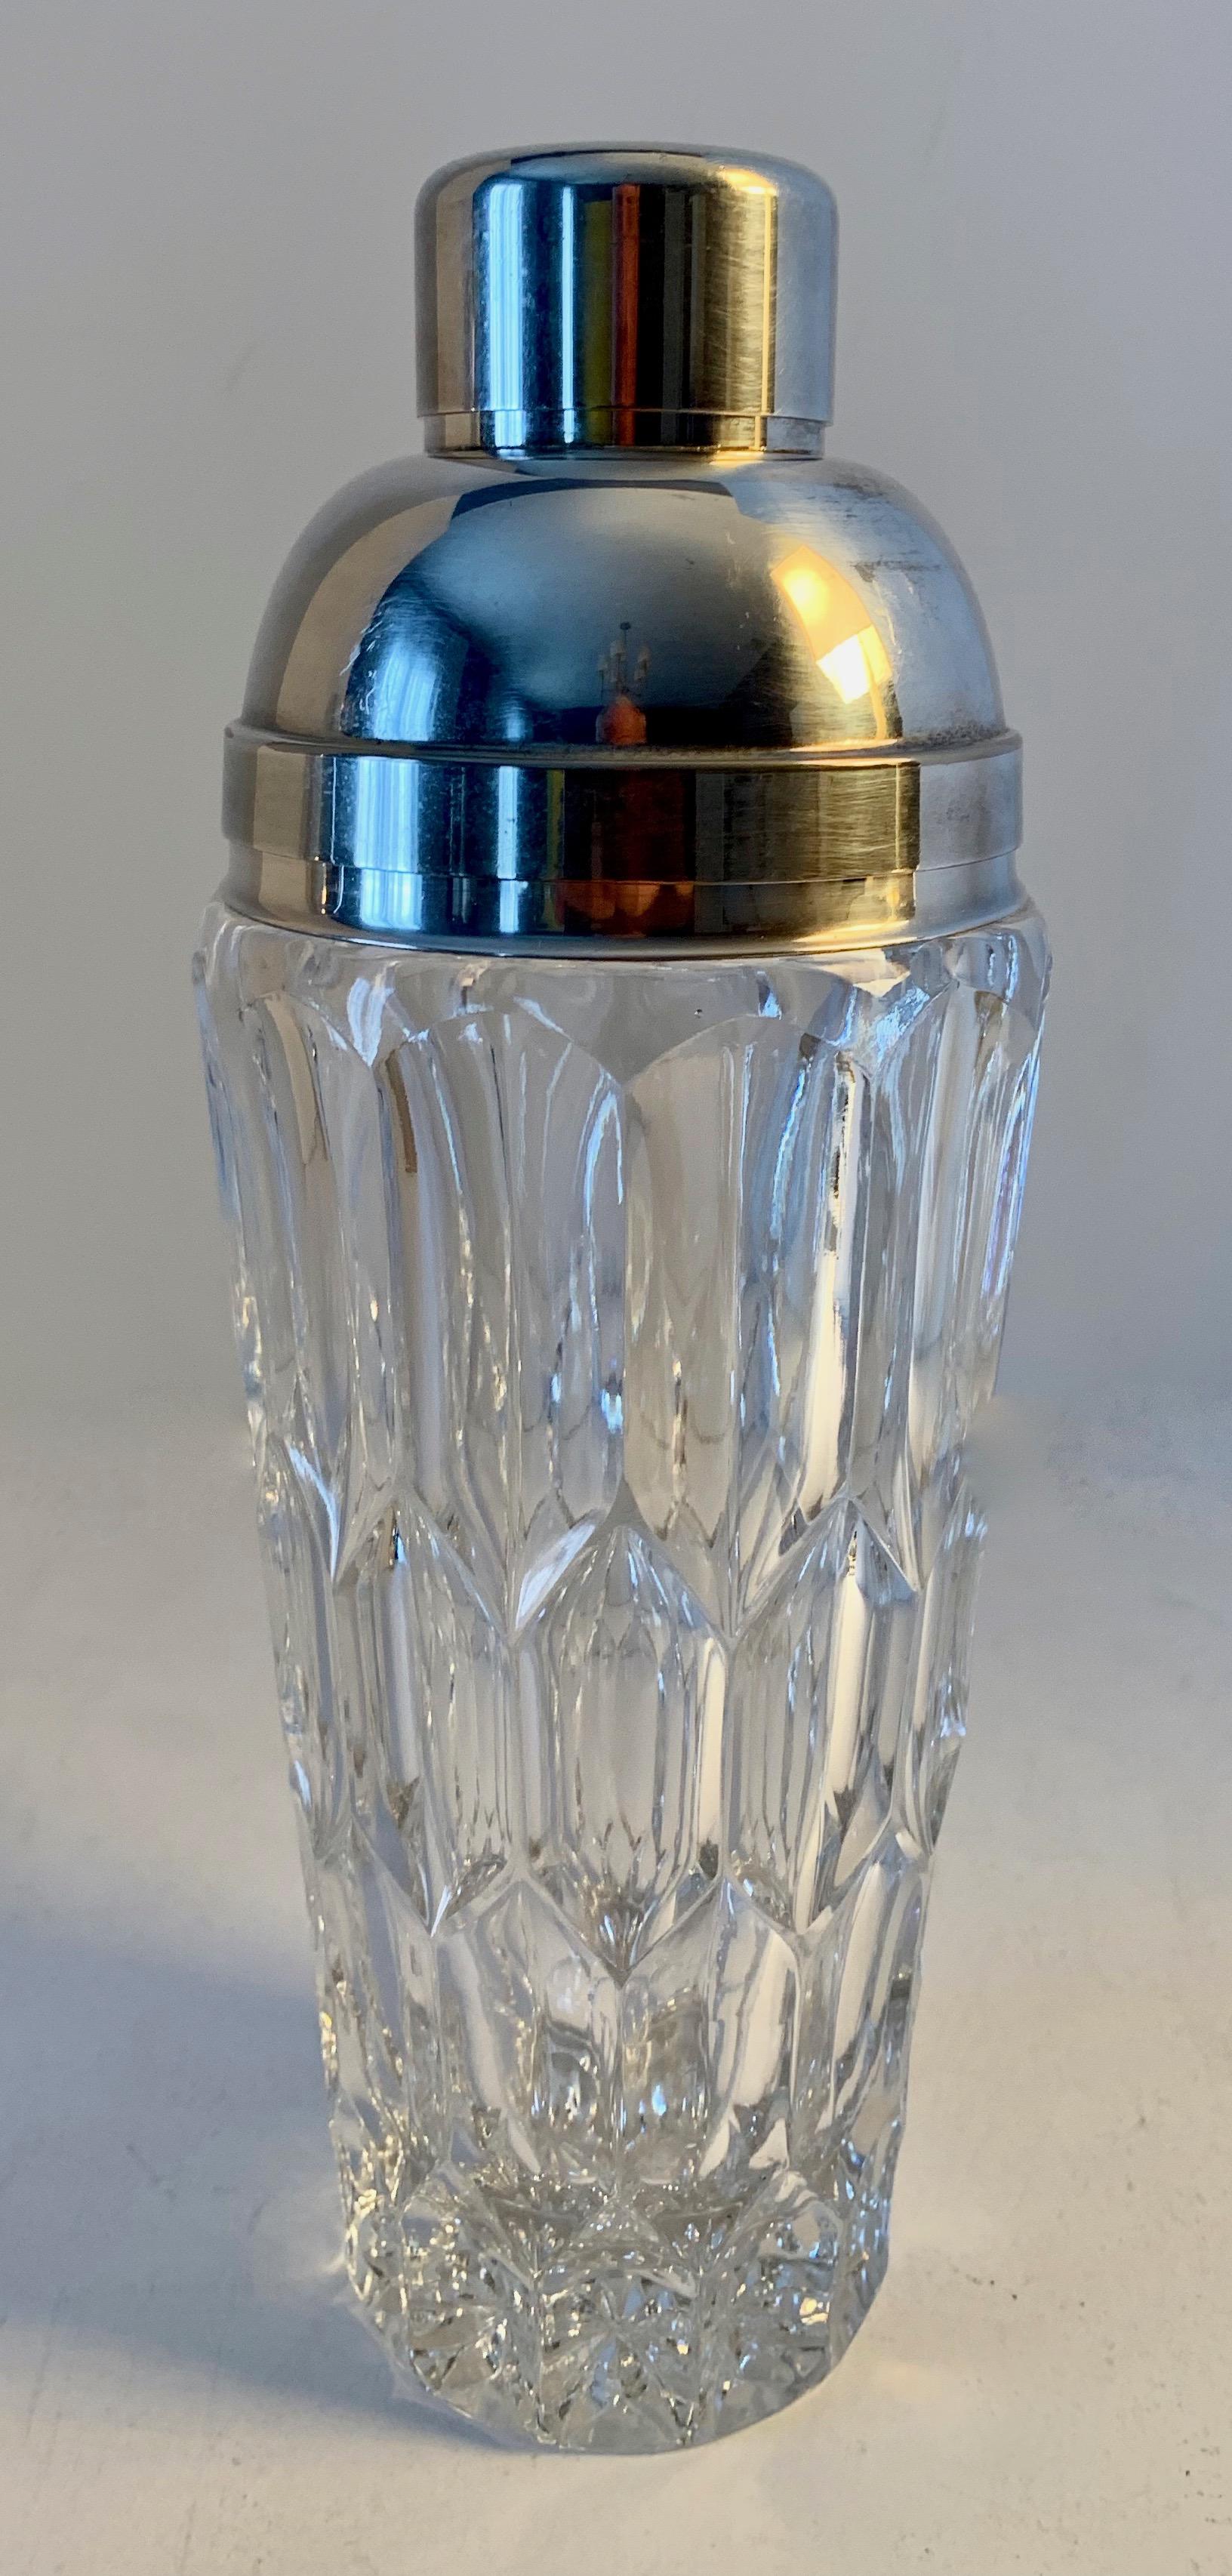 Crystal and silver plate cocktail shaker, a handsome and sophisticated midcentury cocktail shaker well suited for any bar. The straining top is fitted with a cork, perfect for the best bar!